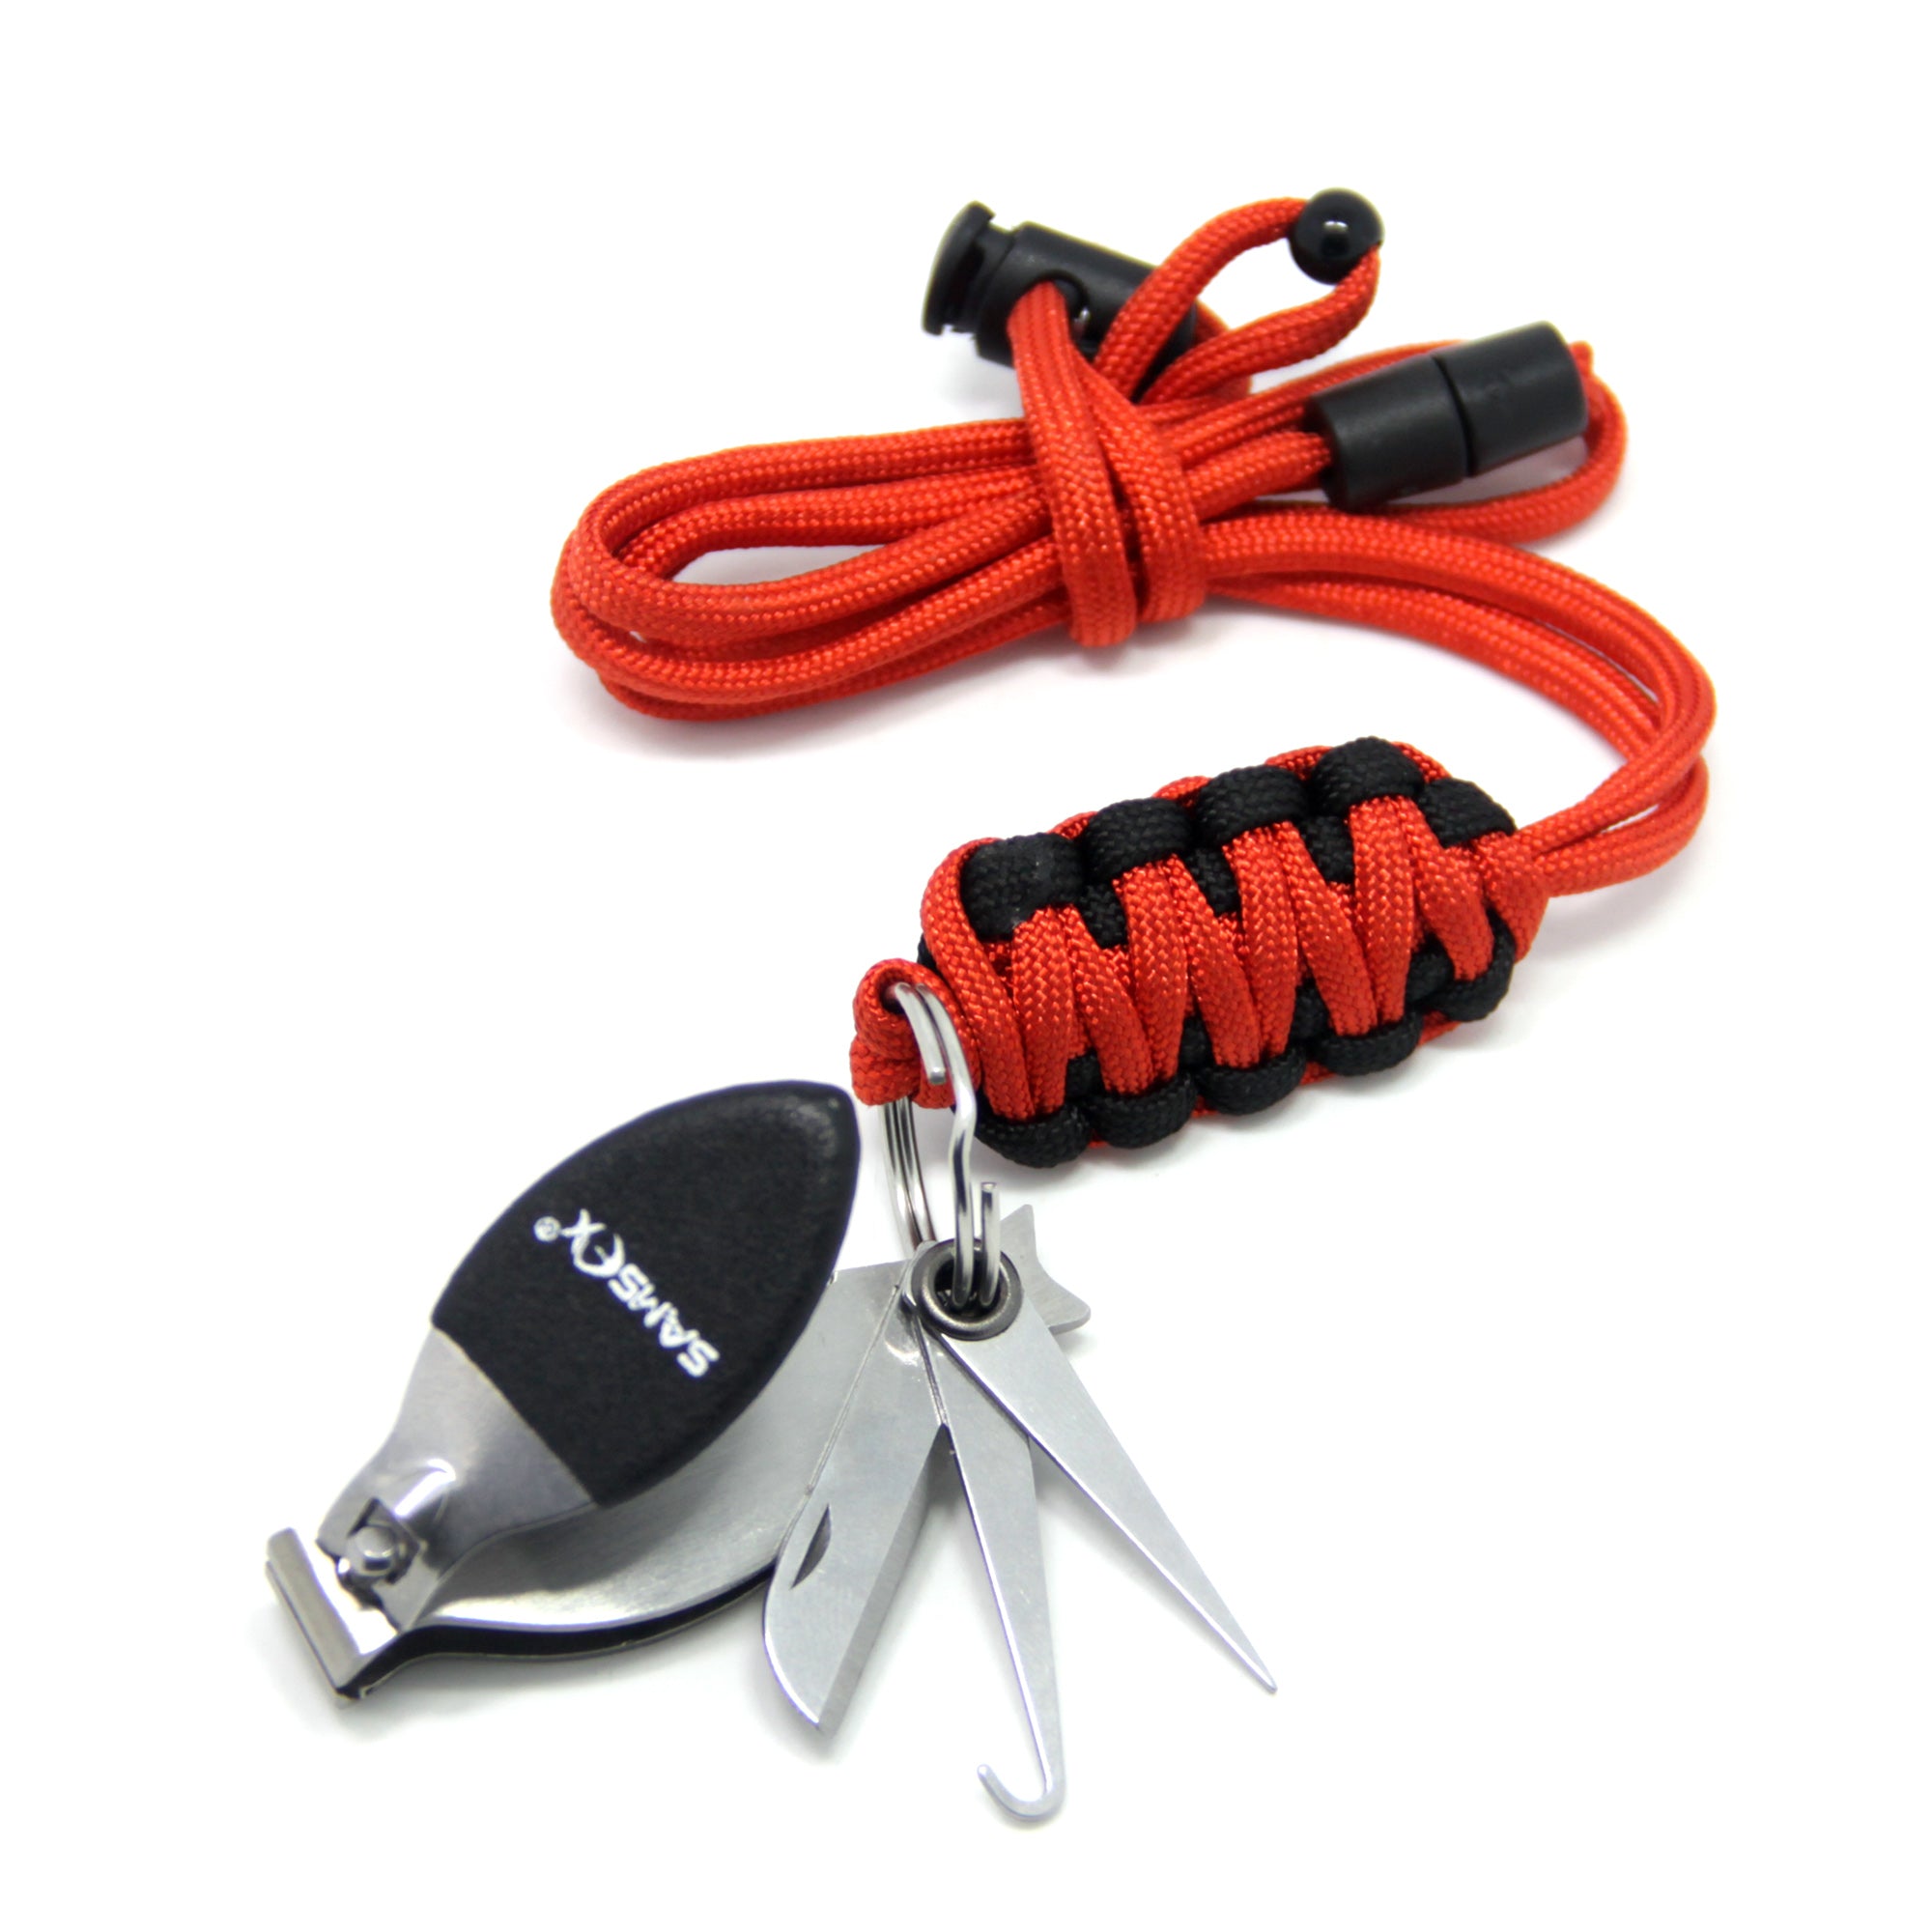 SAMSFX Fly Fishing Line Clippers with Adjustable Lanyard Tippet